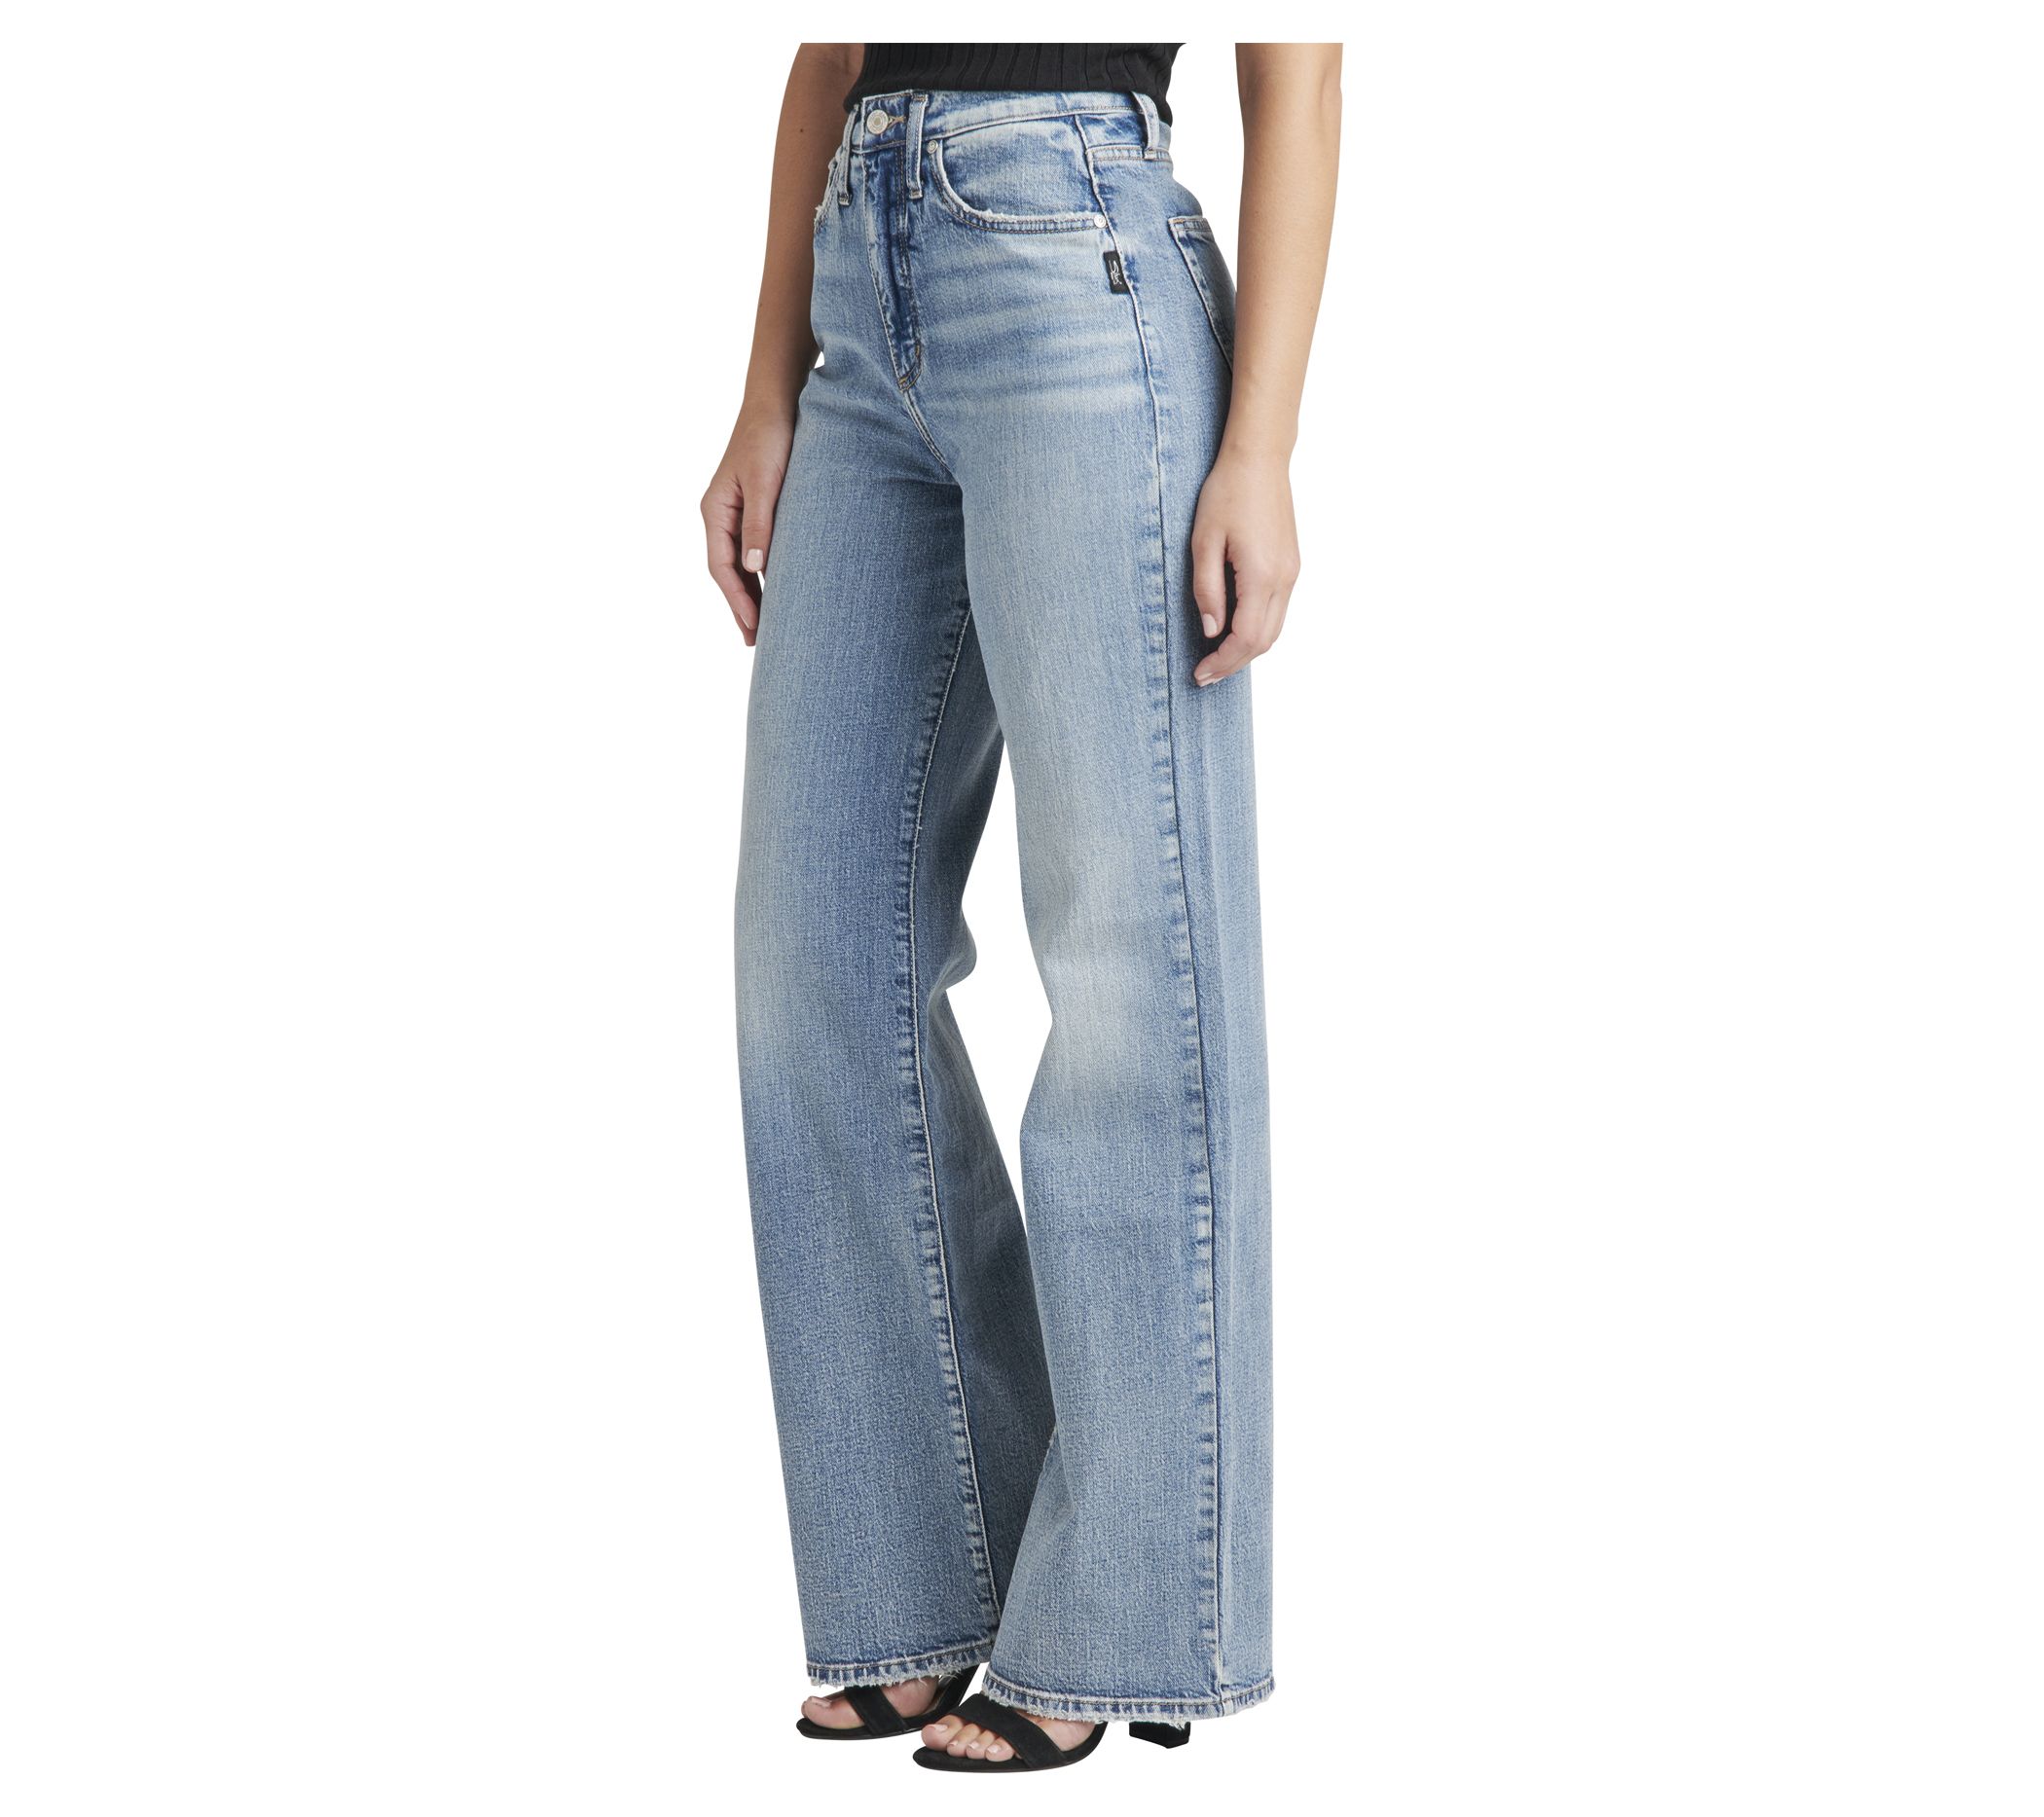 Silver Jeans Co. Highly Desirable Trouser Leg Jeans-RCS287 - QVC.com